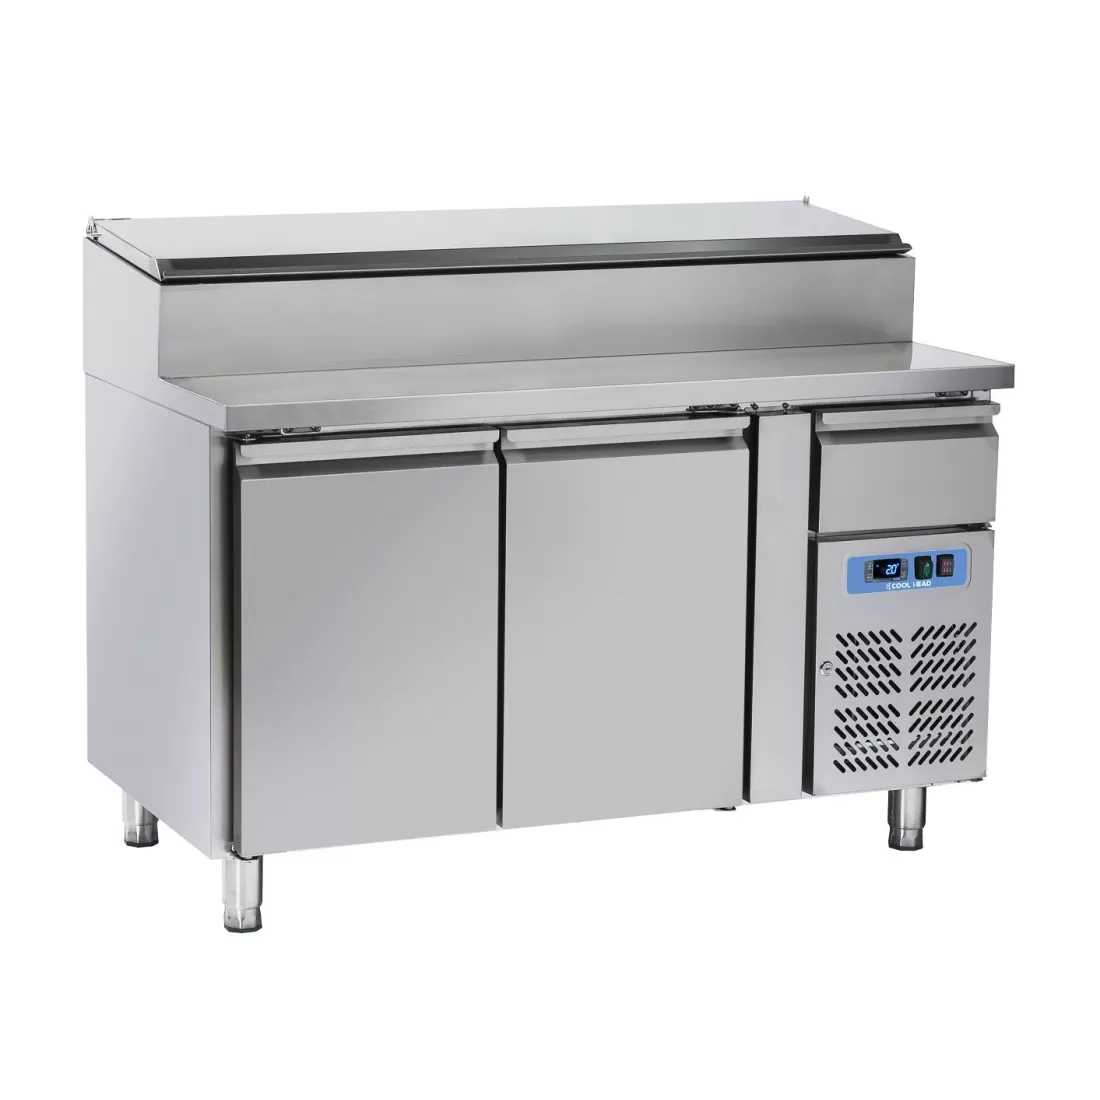 COOL HEAD (SH2700) Sandwich and Pizza Prep Refrigerator with Two Doors